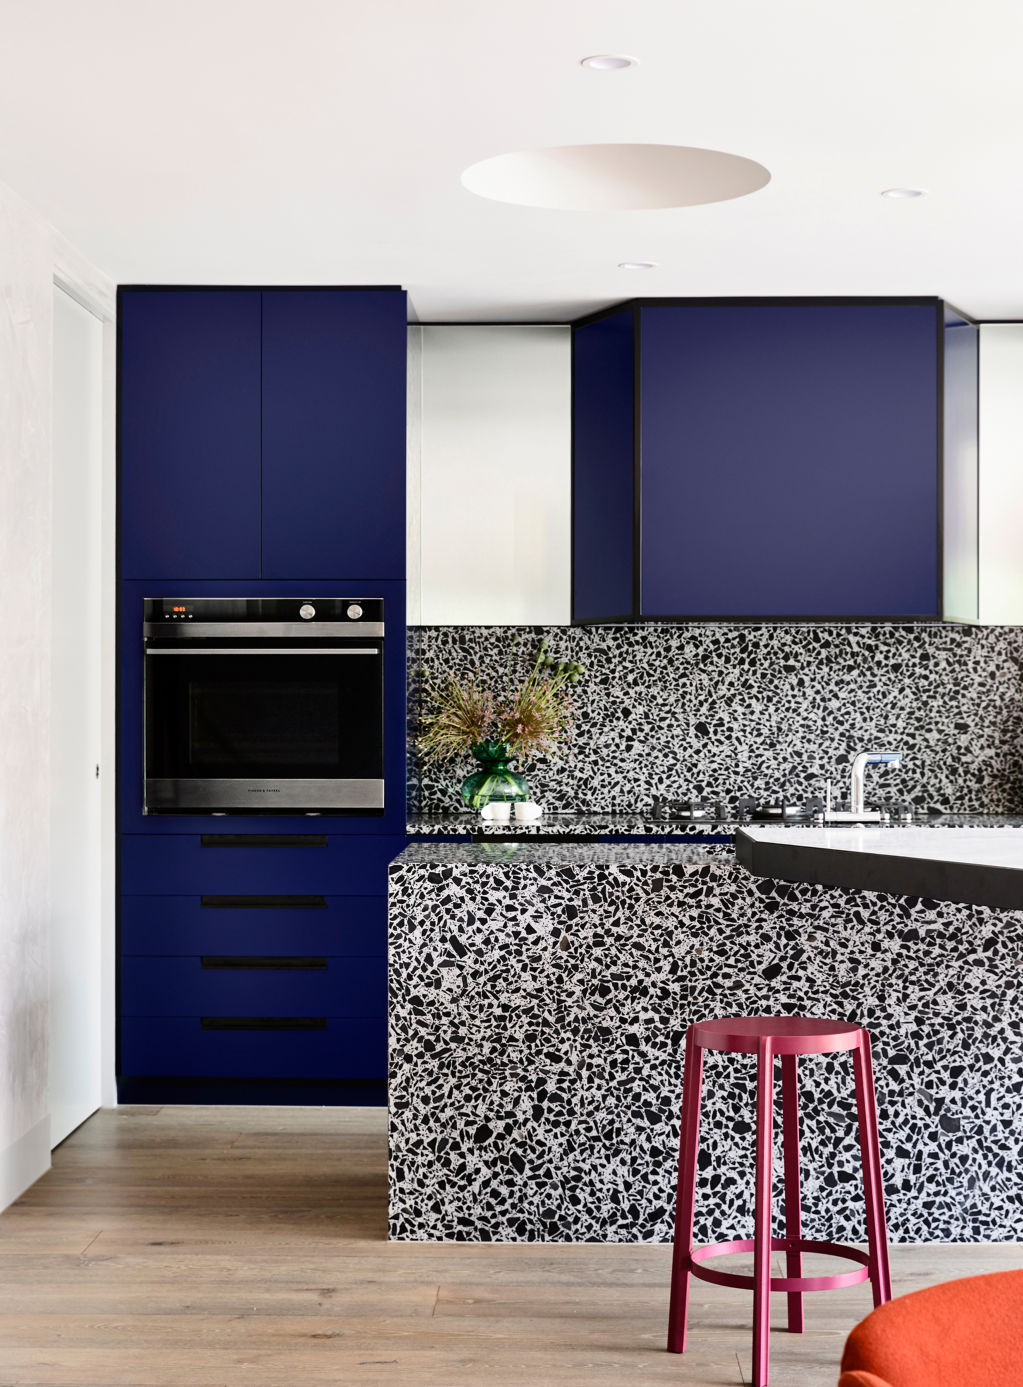 Doherty Design Studio employed colour to spectacular effect in its renewal of a St Kilda residence. Photo: Derek Swalwell